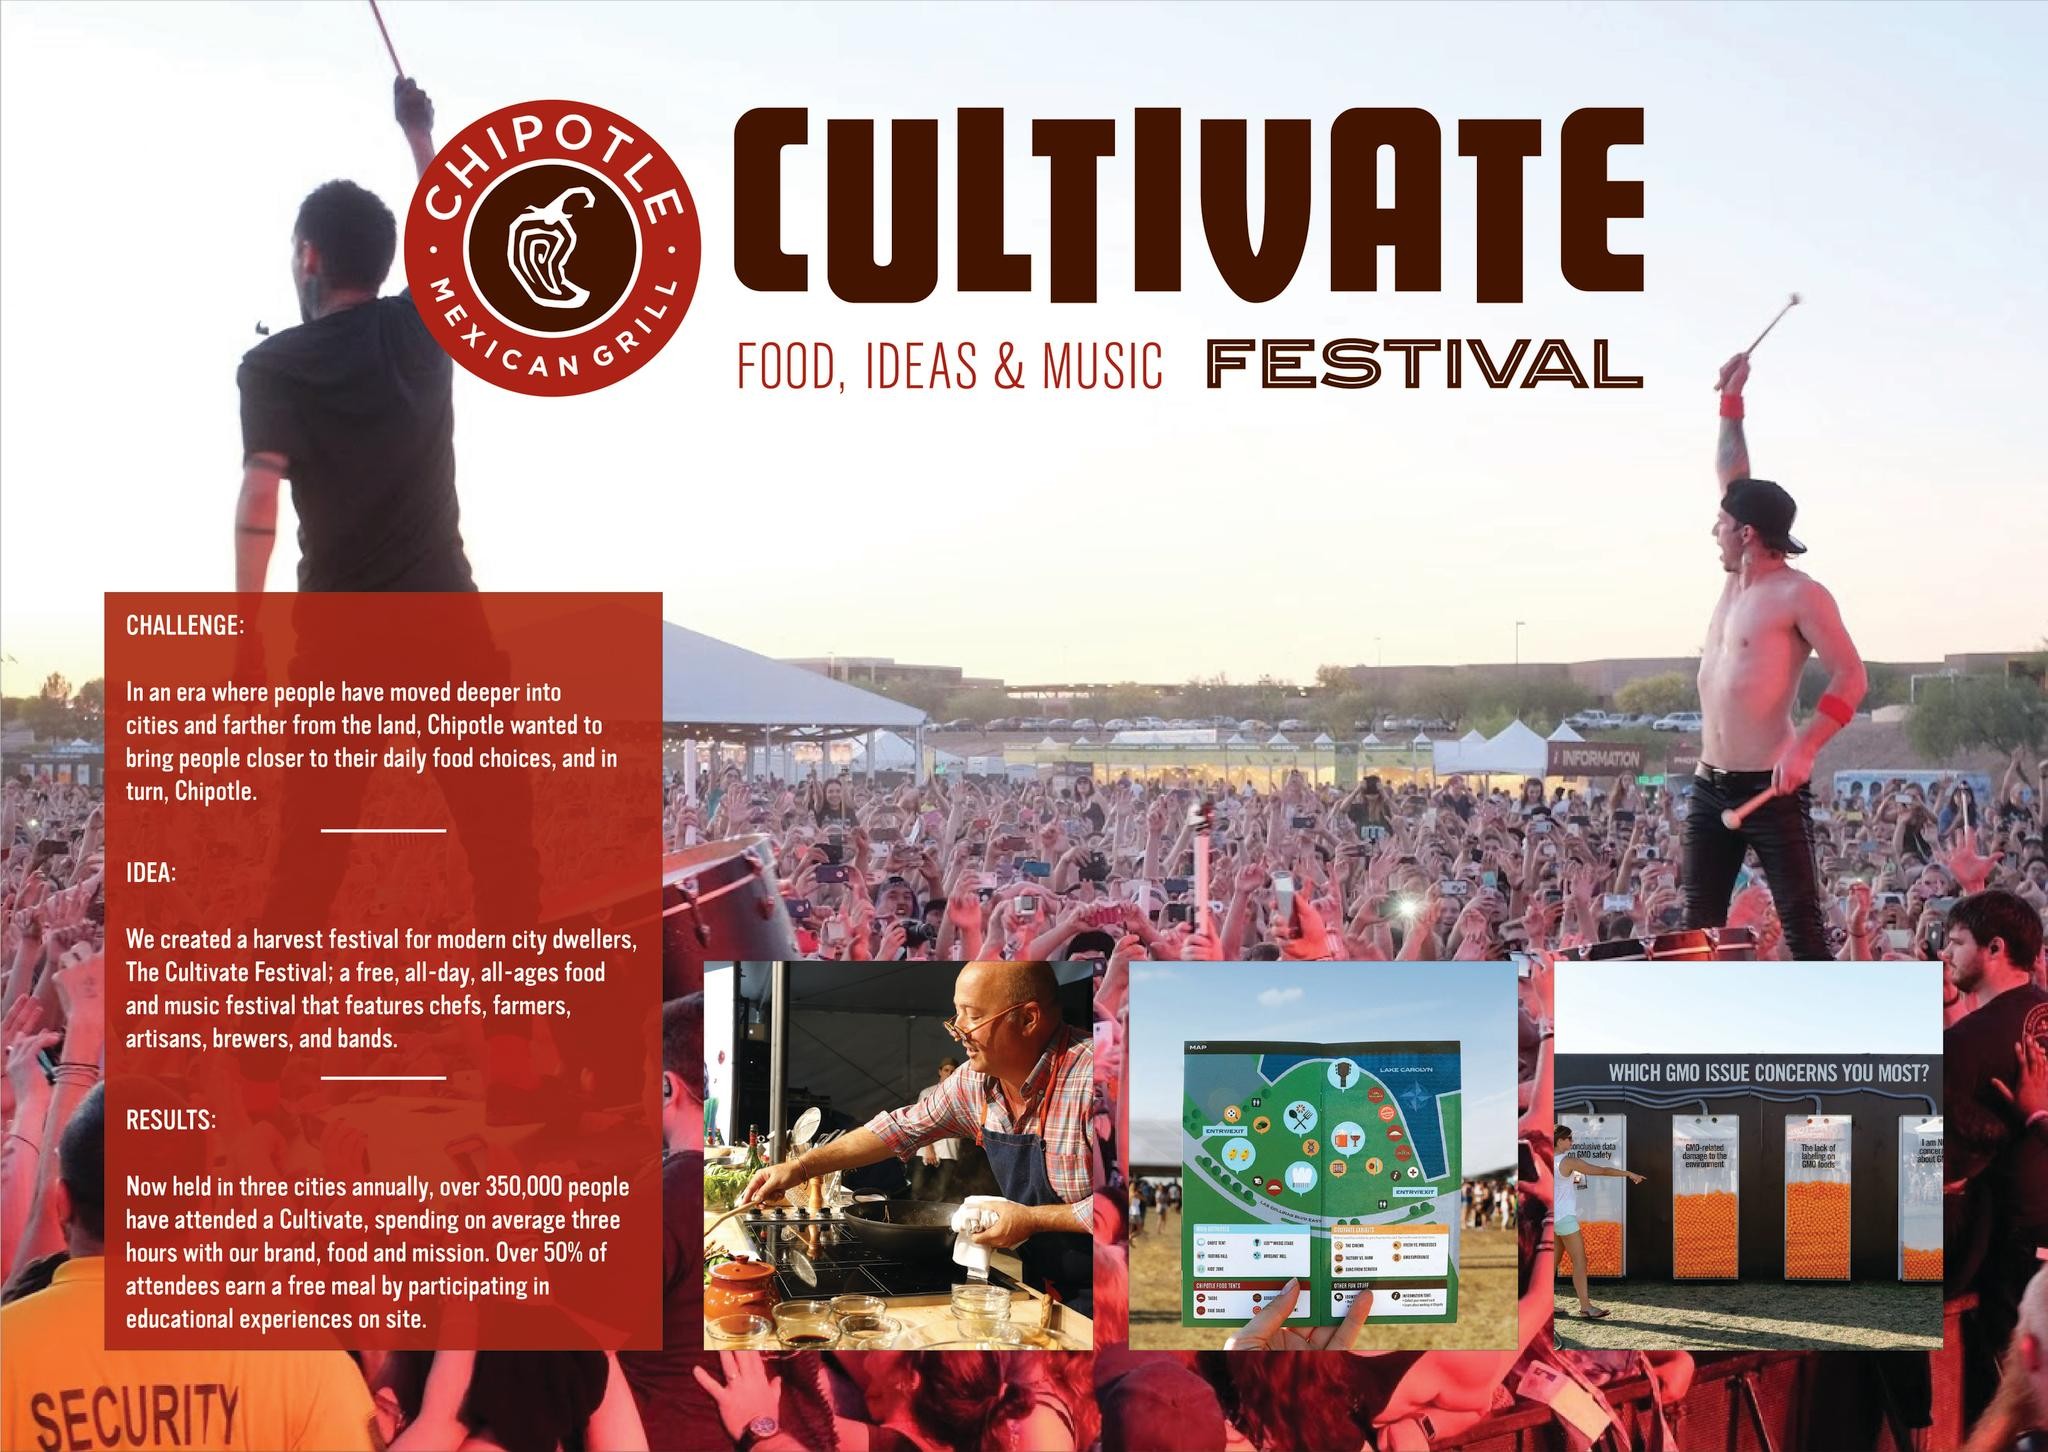 The Cultivate Festival 2015